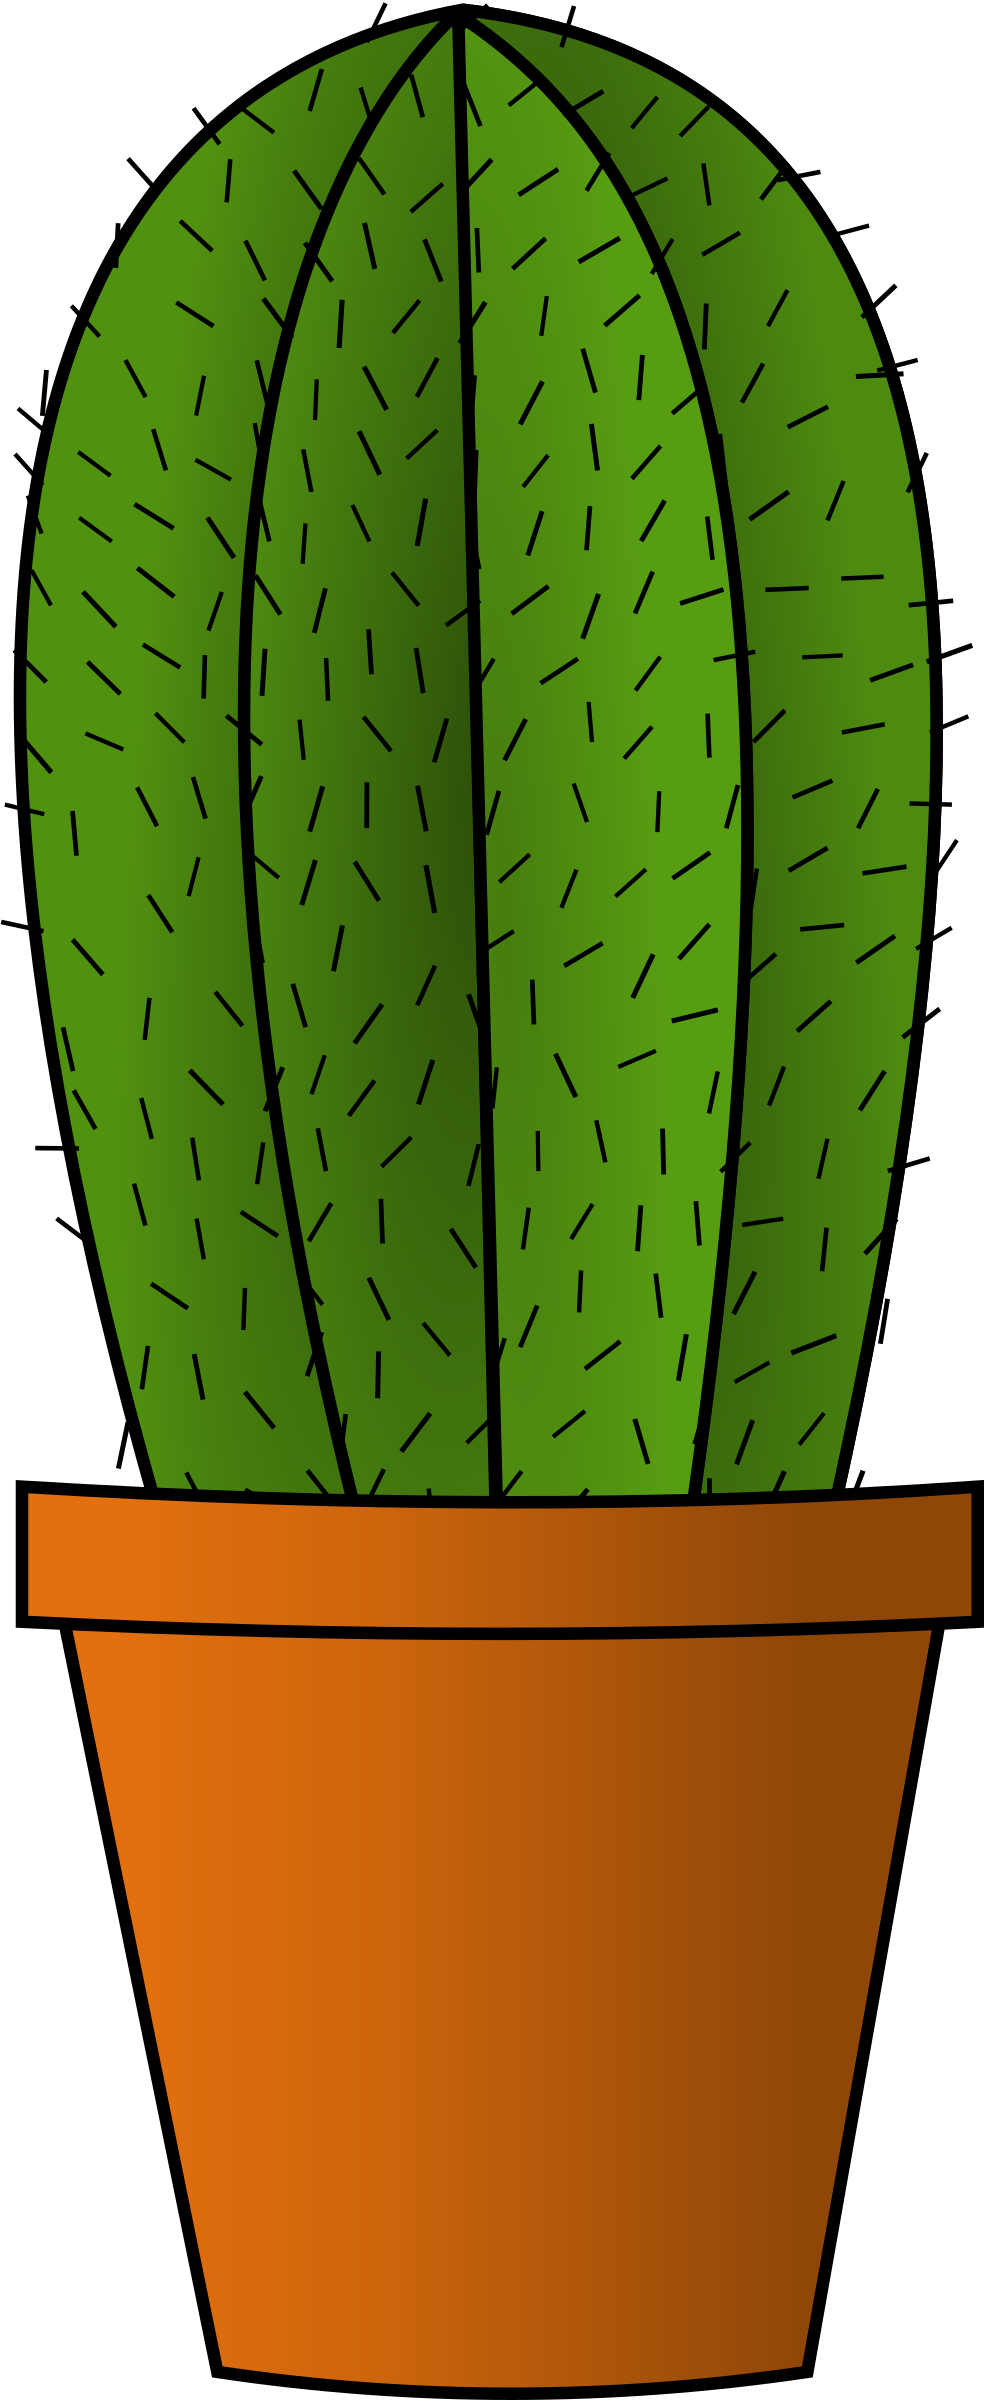 2012 February 19 Peacesymbol - Cactus In Pot Clipart (984x2400)